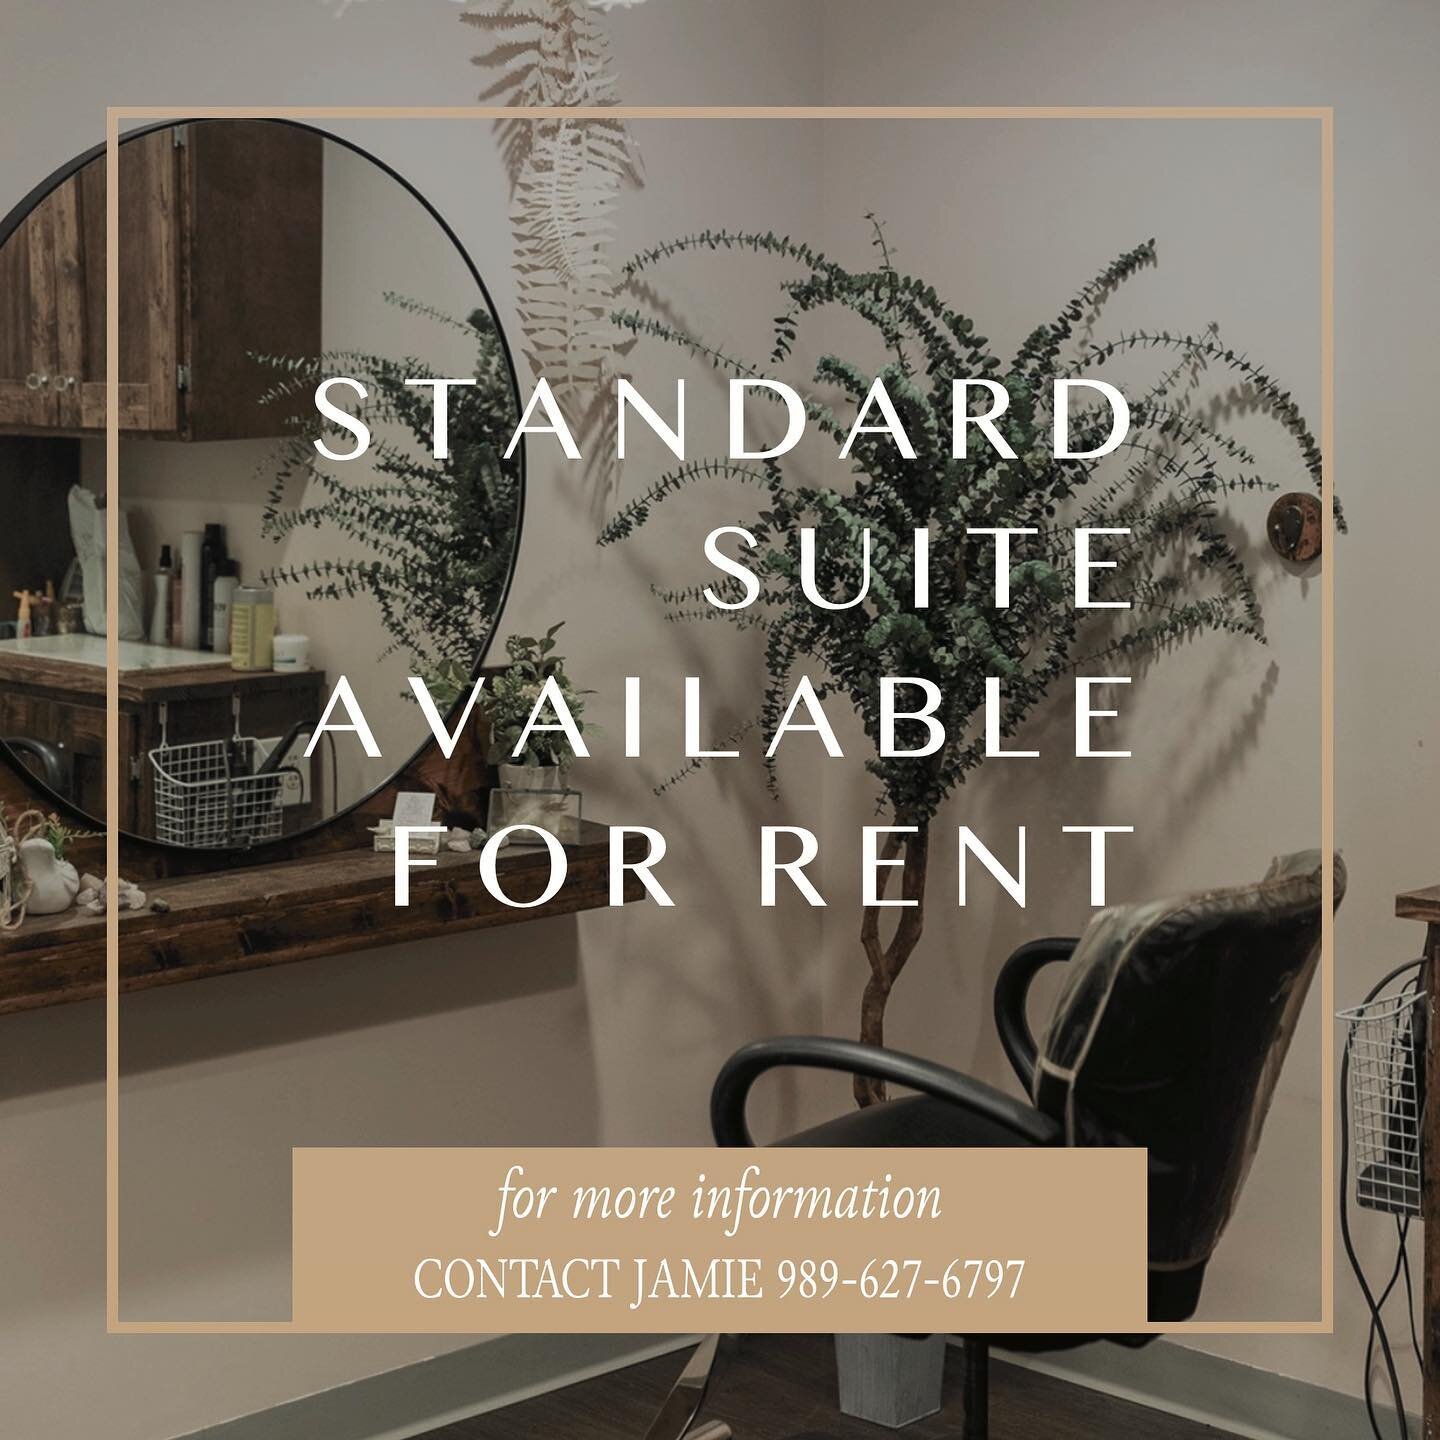 🚨 Suite Available 🚨

📞Jamie Smith 989-627-6797